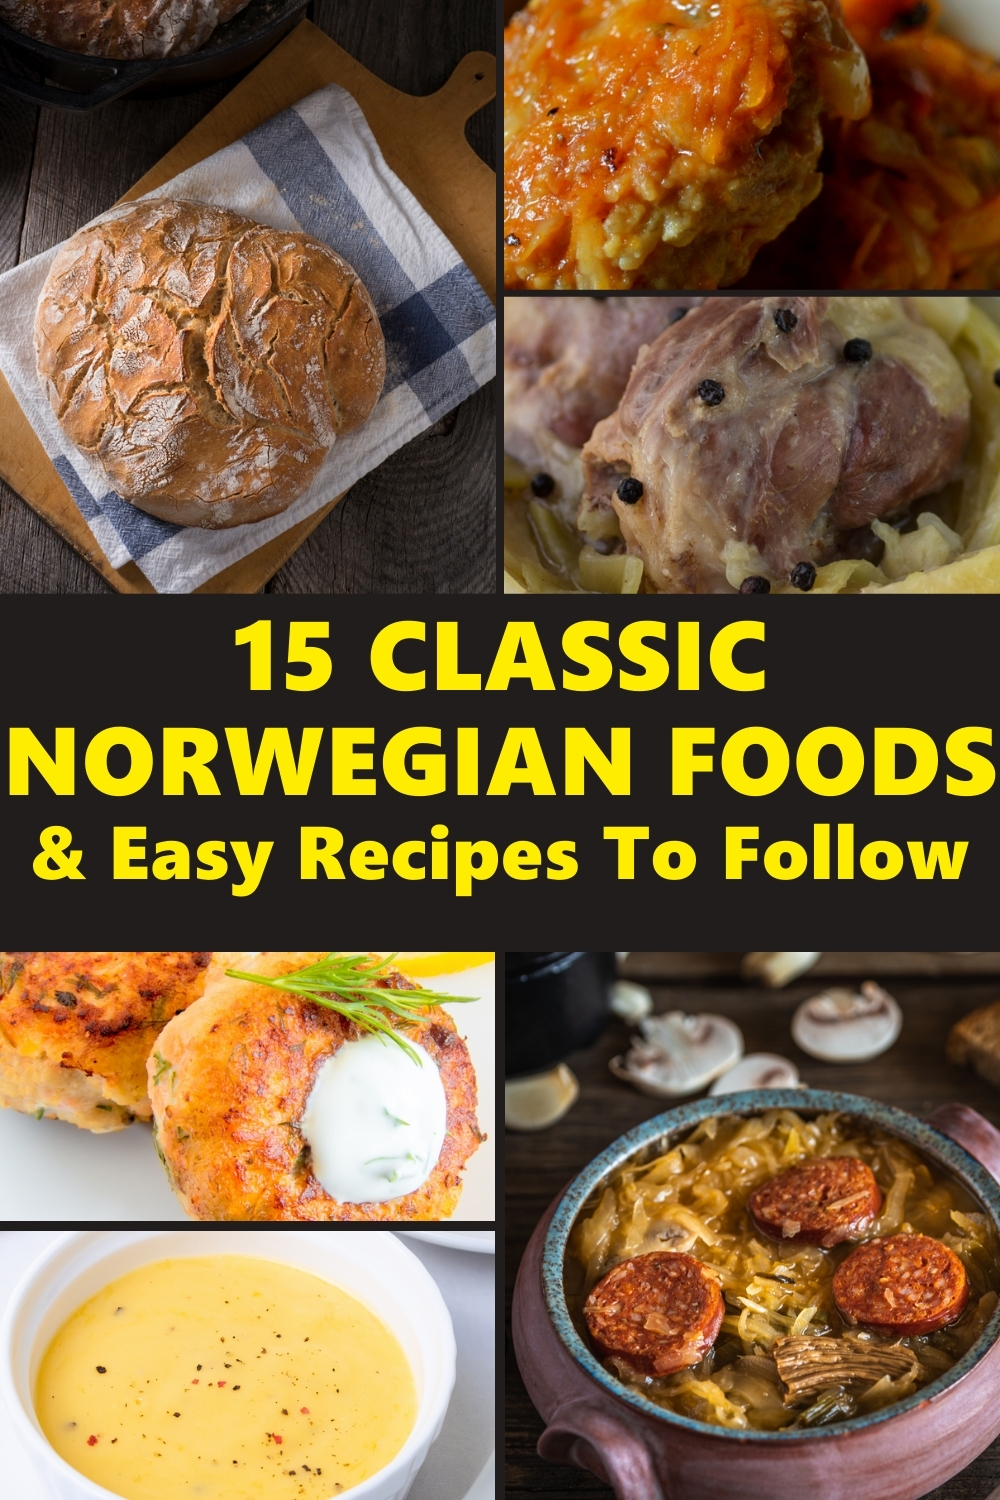 15 Classic Norwegian Foods & Easy Recipes To Follow (1)